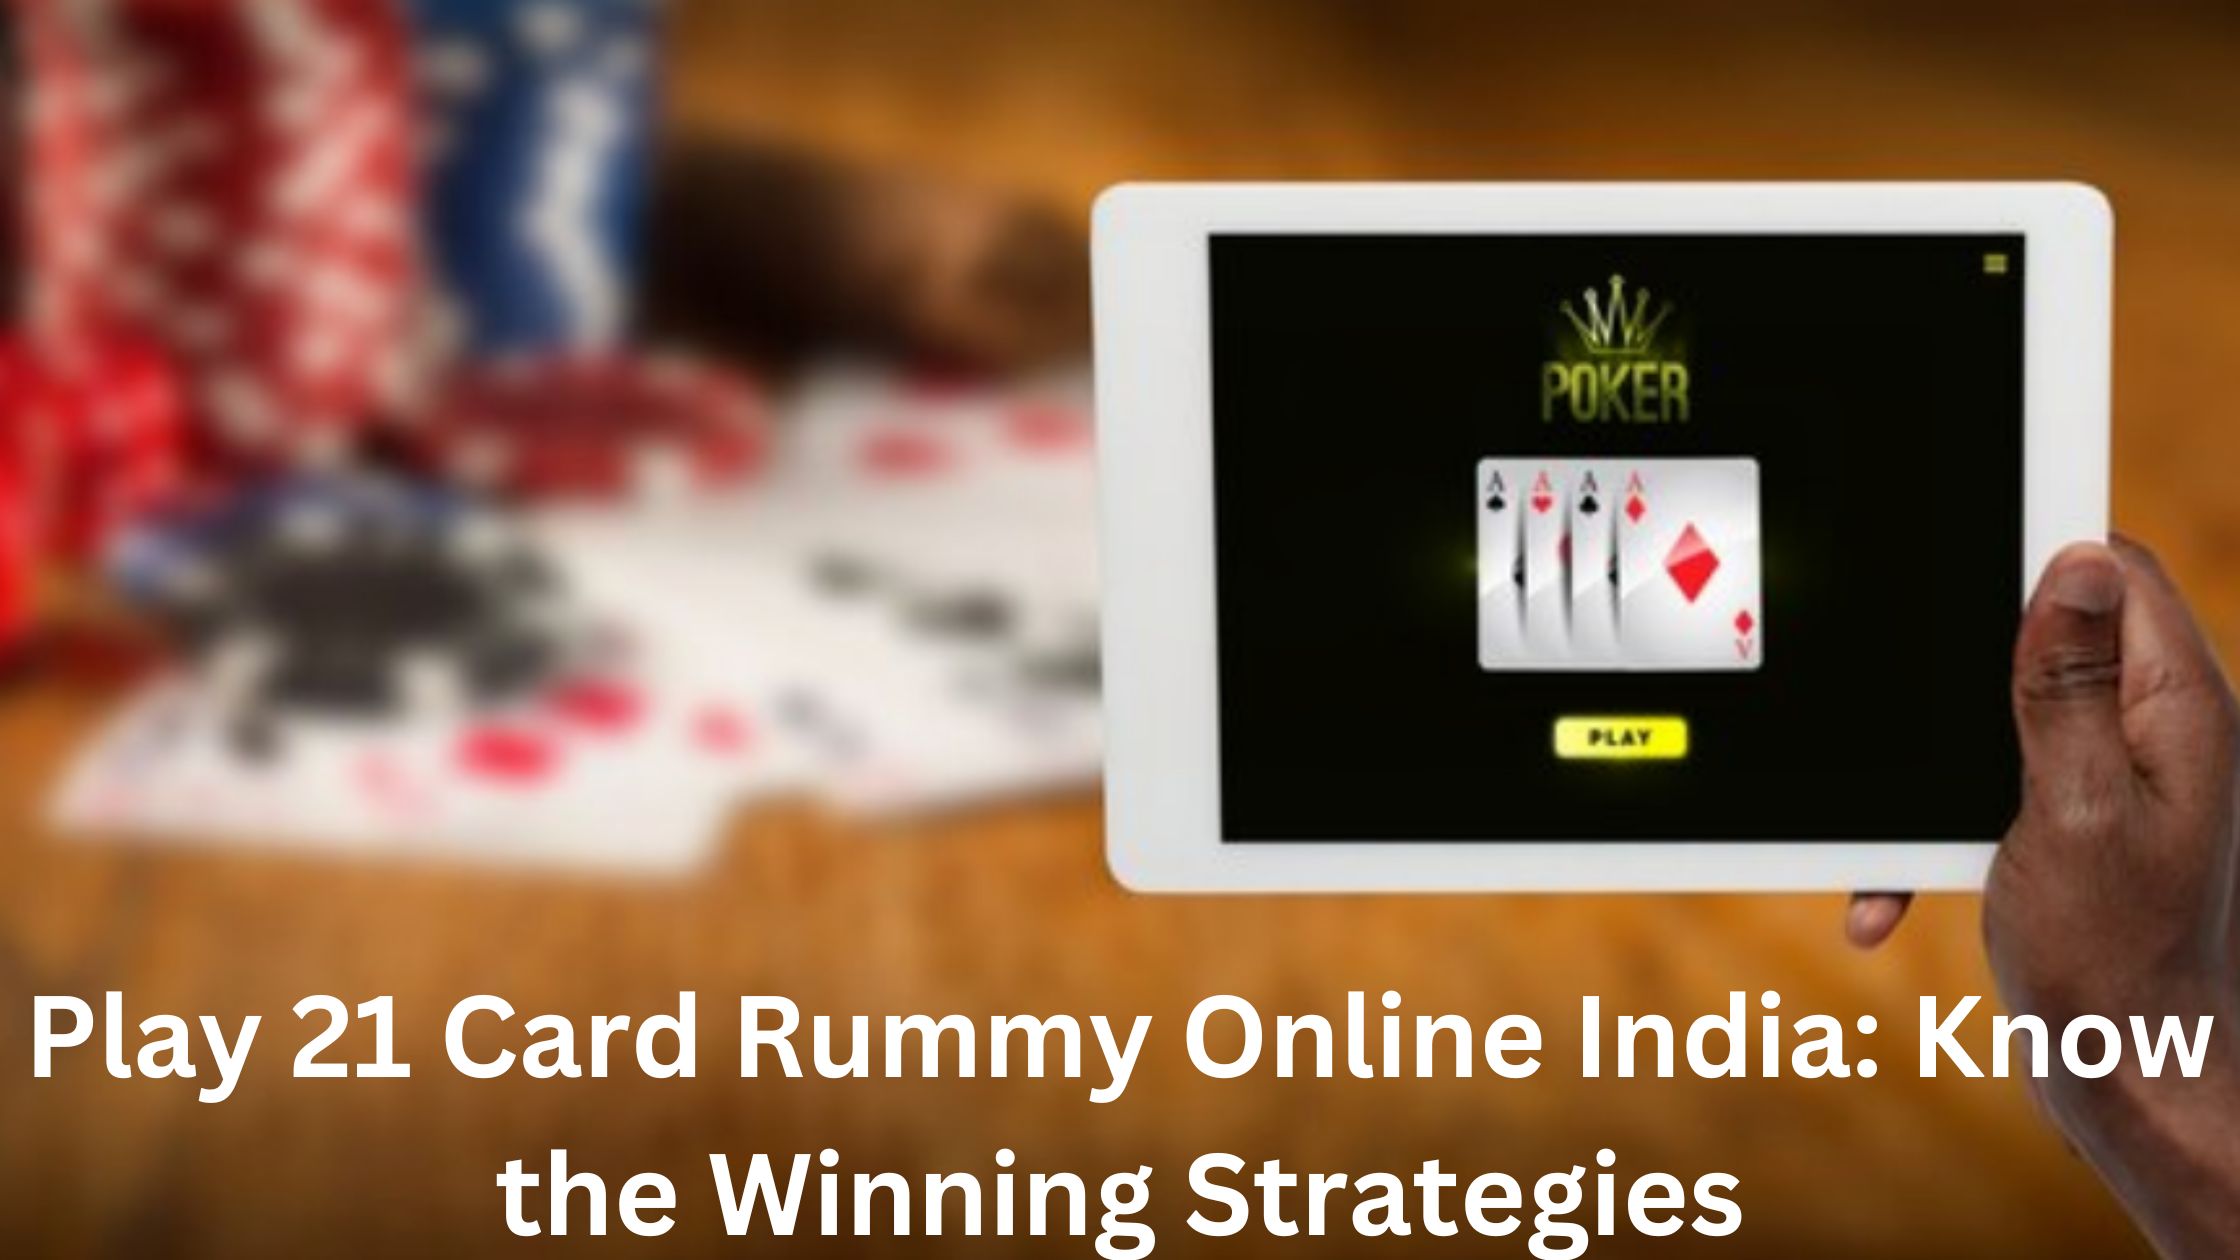 Play 21 Card Rummy Online India